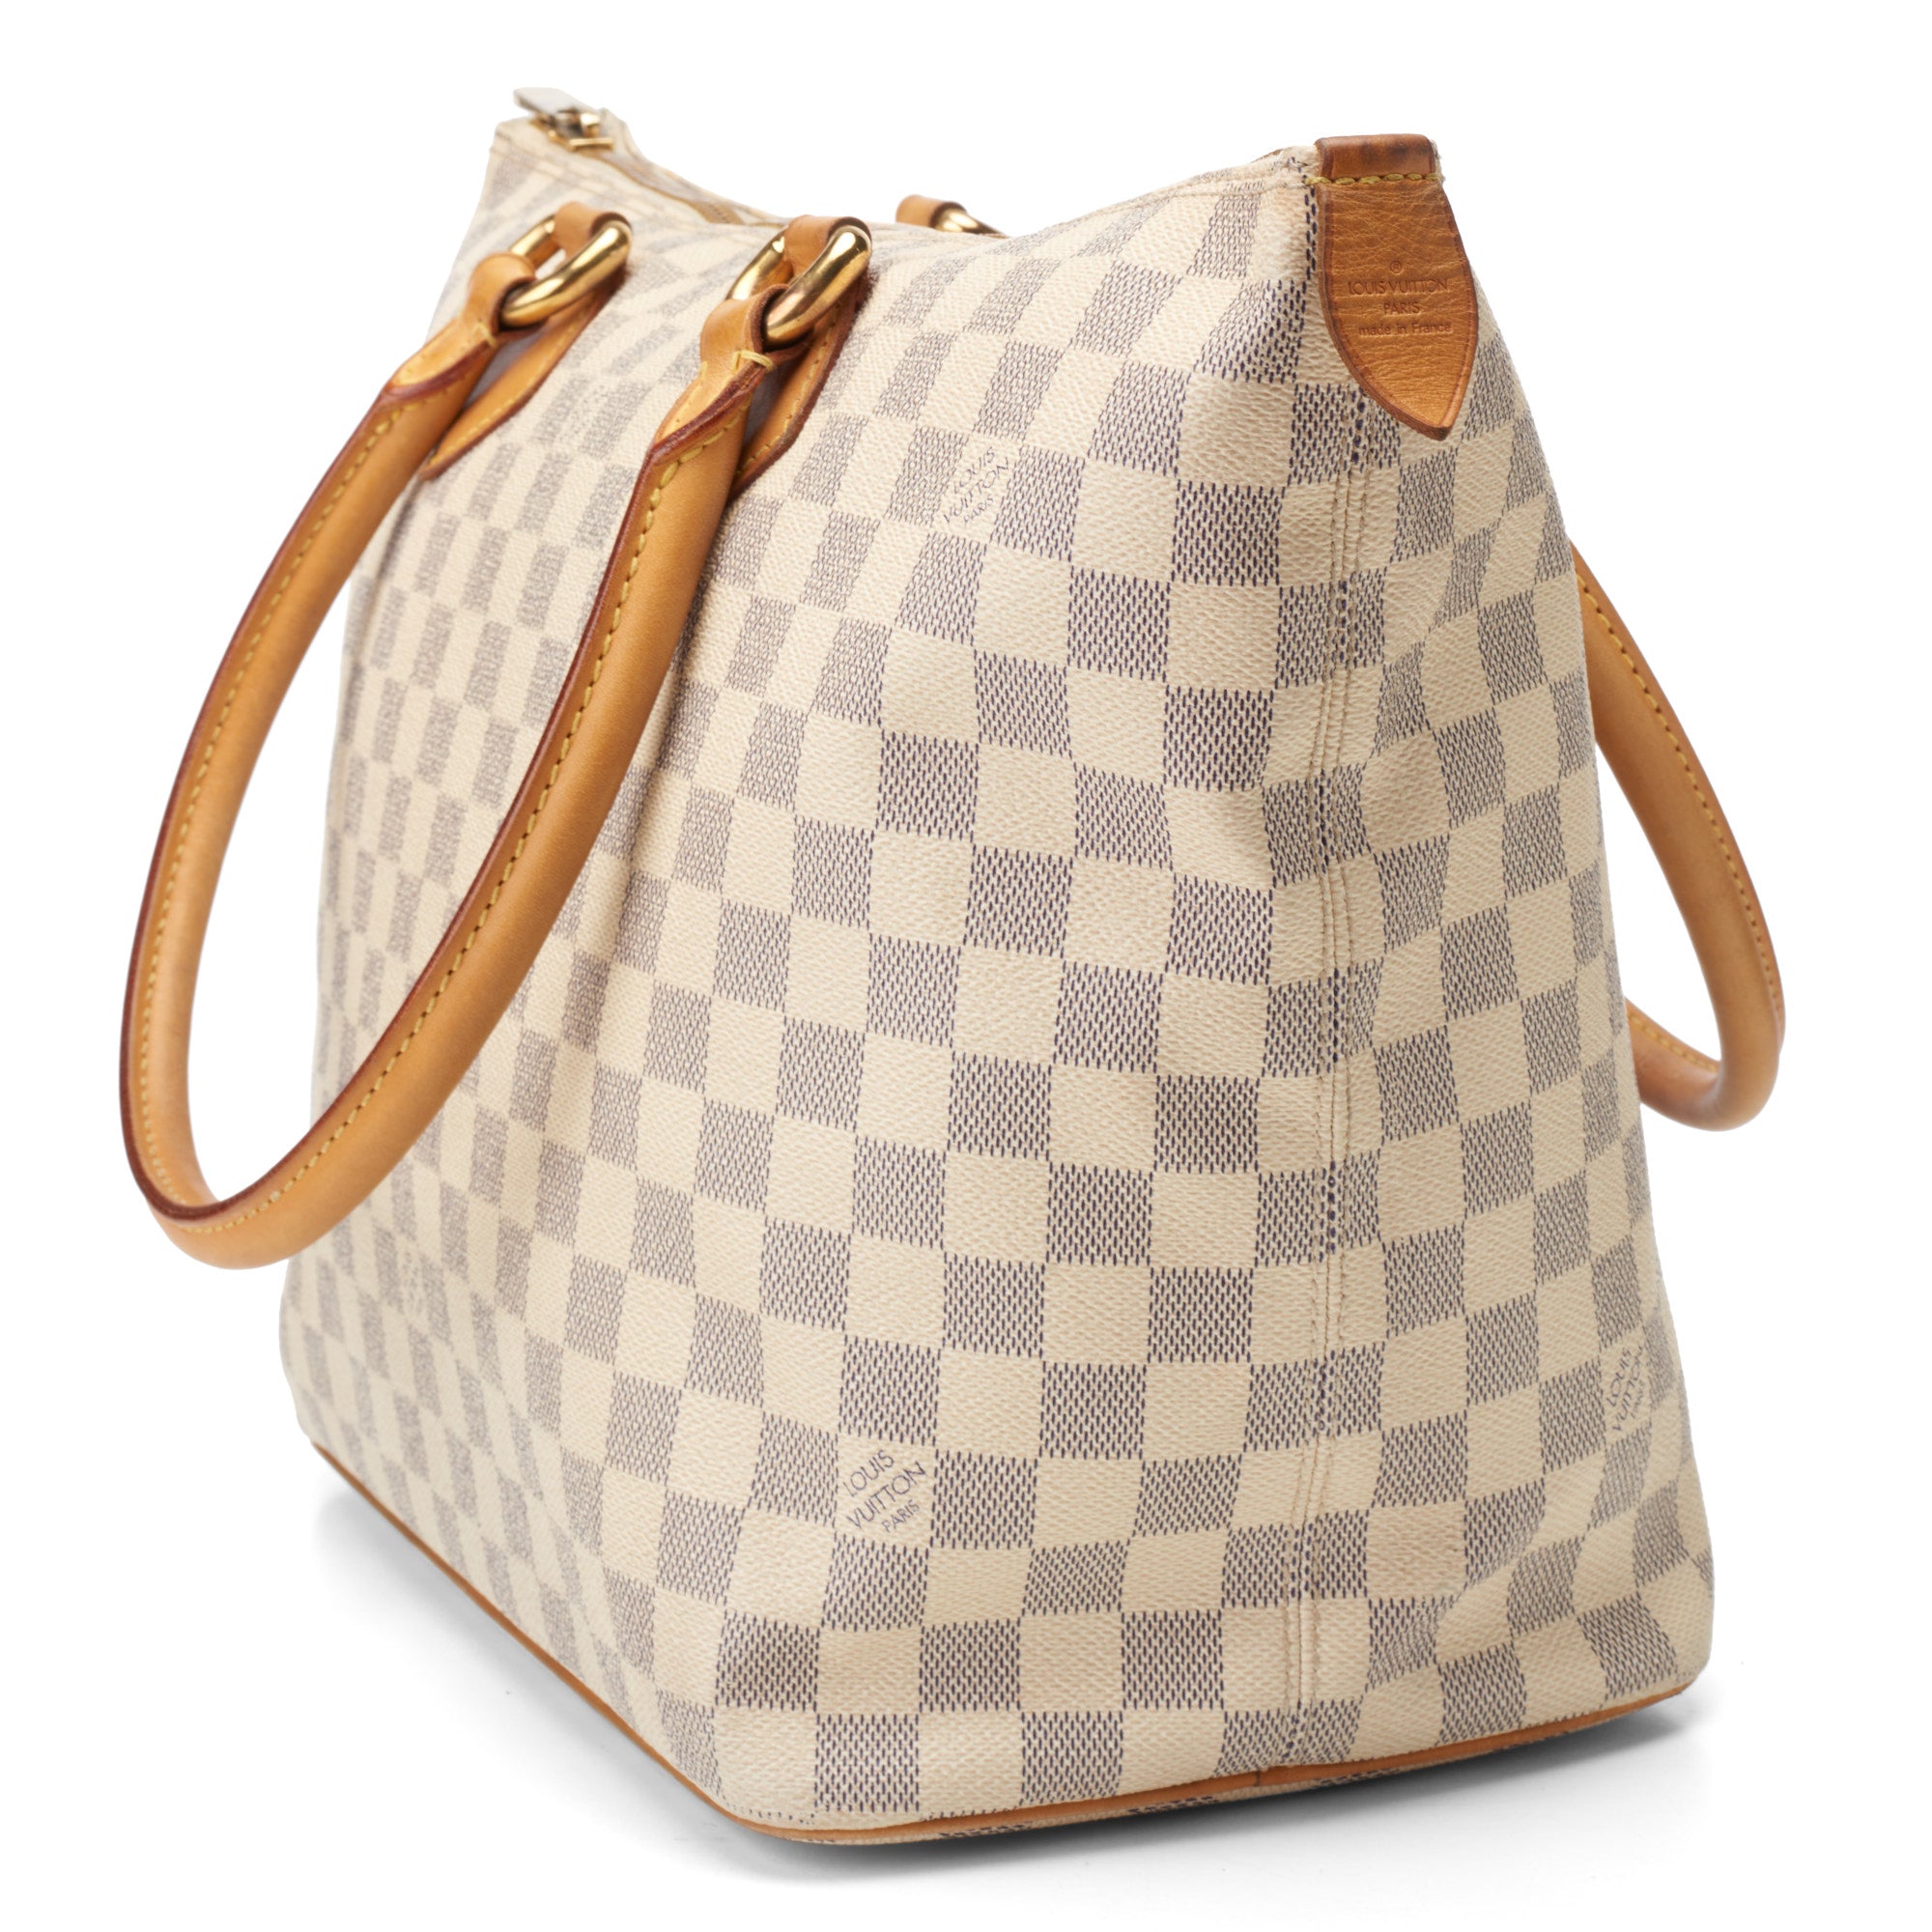 Louis+Vuitton+Neverfull+Tote+MM+Blue%2FWhite+Canvas for sale online